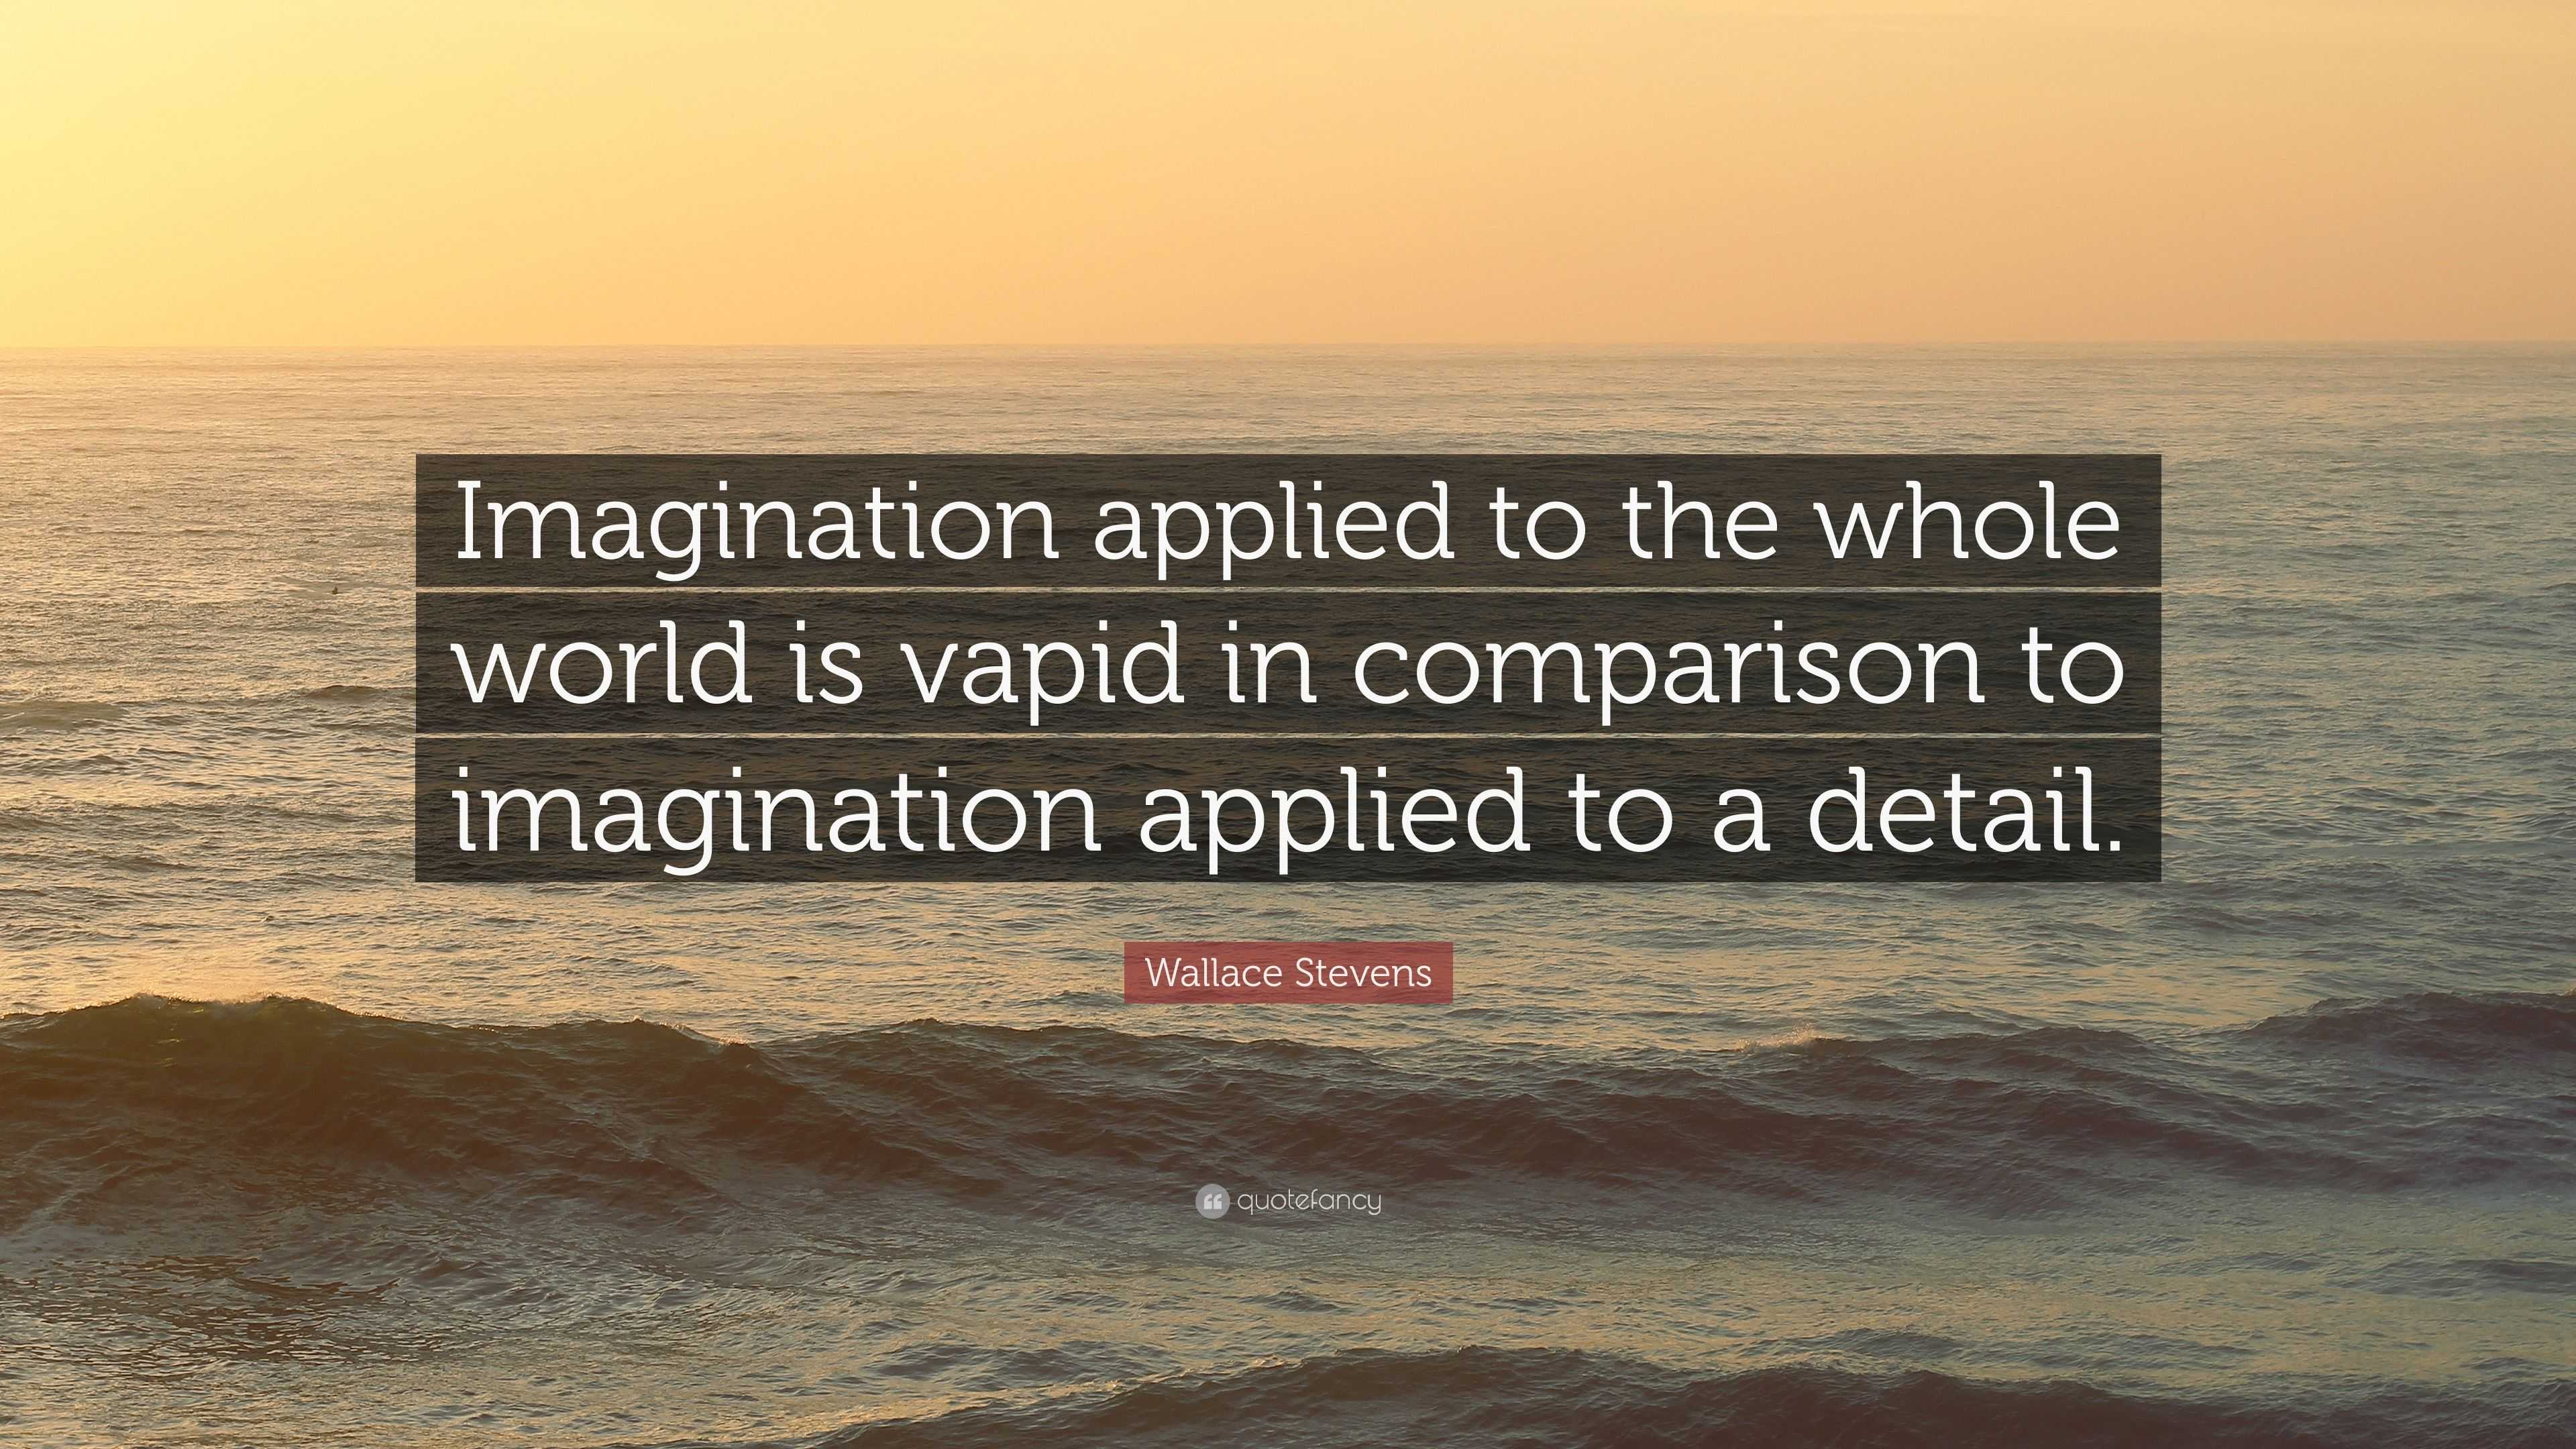 Wallace Stevens Quote: “Imagination applied to the whole world is vapid ...